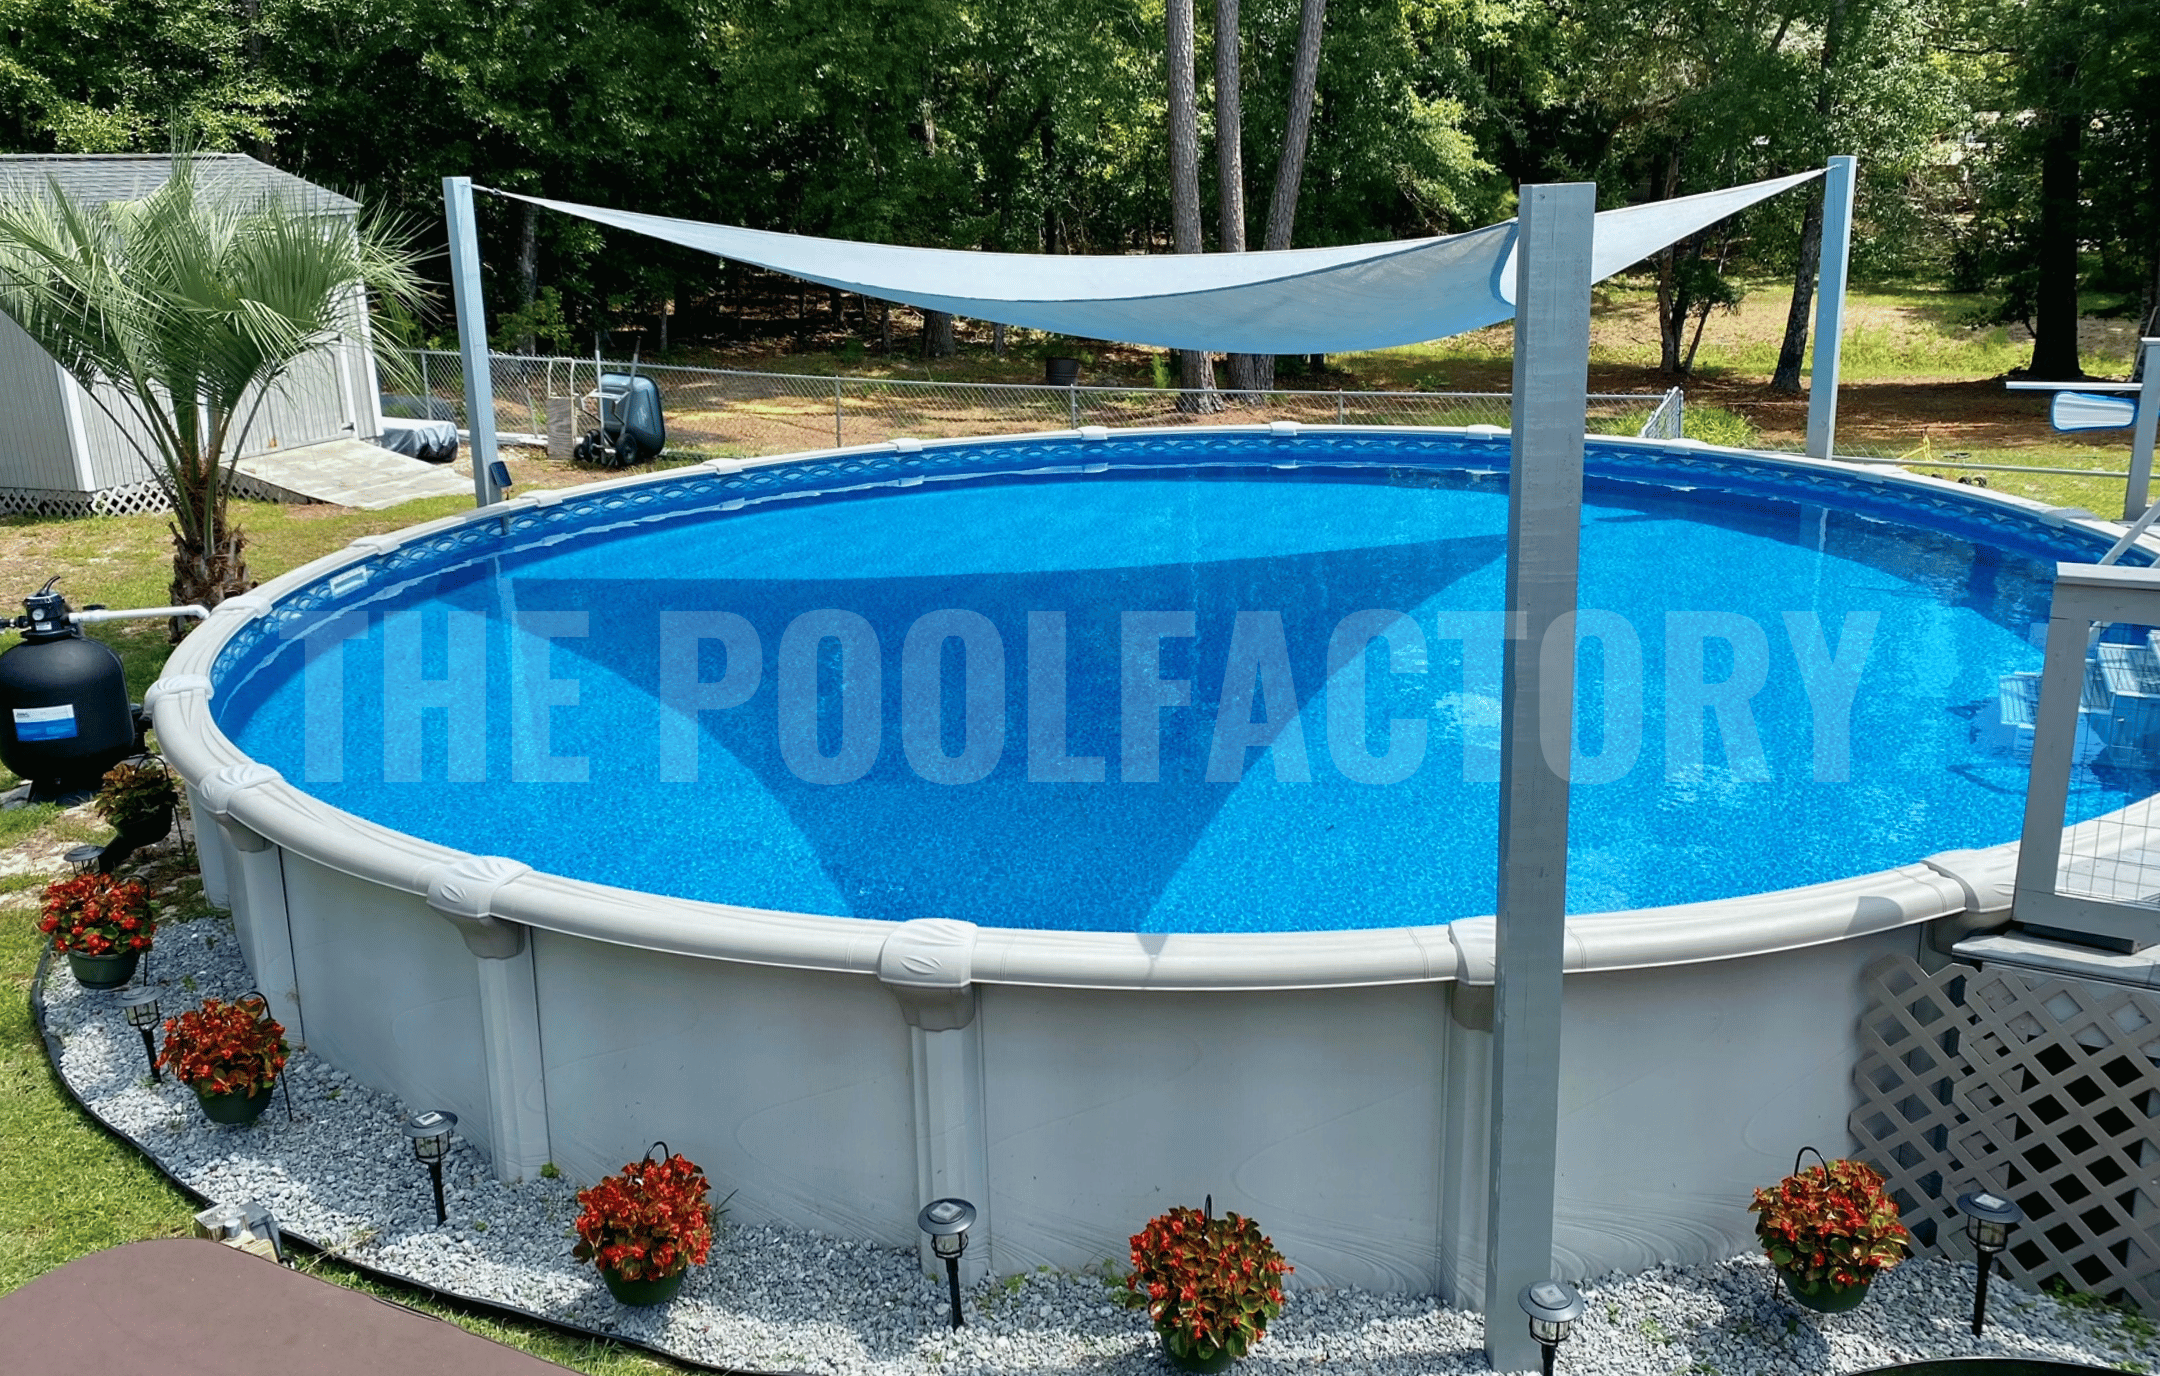 above-ground-pools-shade-ideas-quest.png__PID:78721c4a-e3b9-4a94-8243-02b99364e659